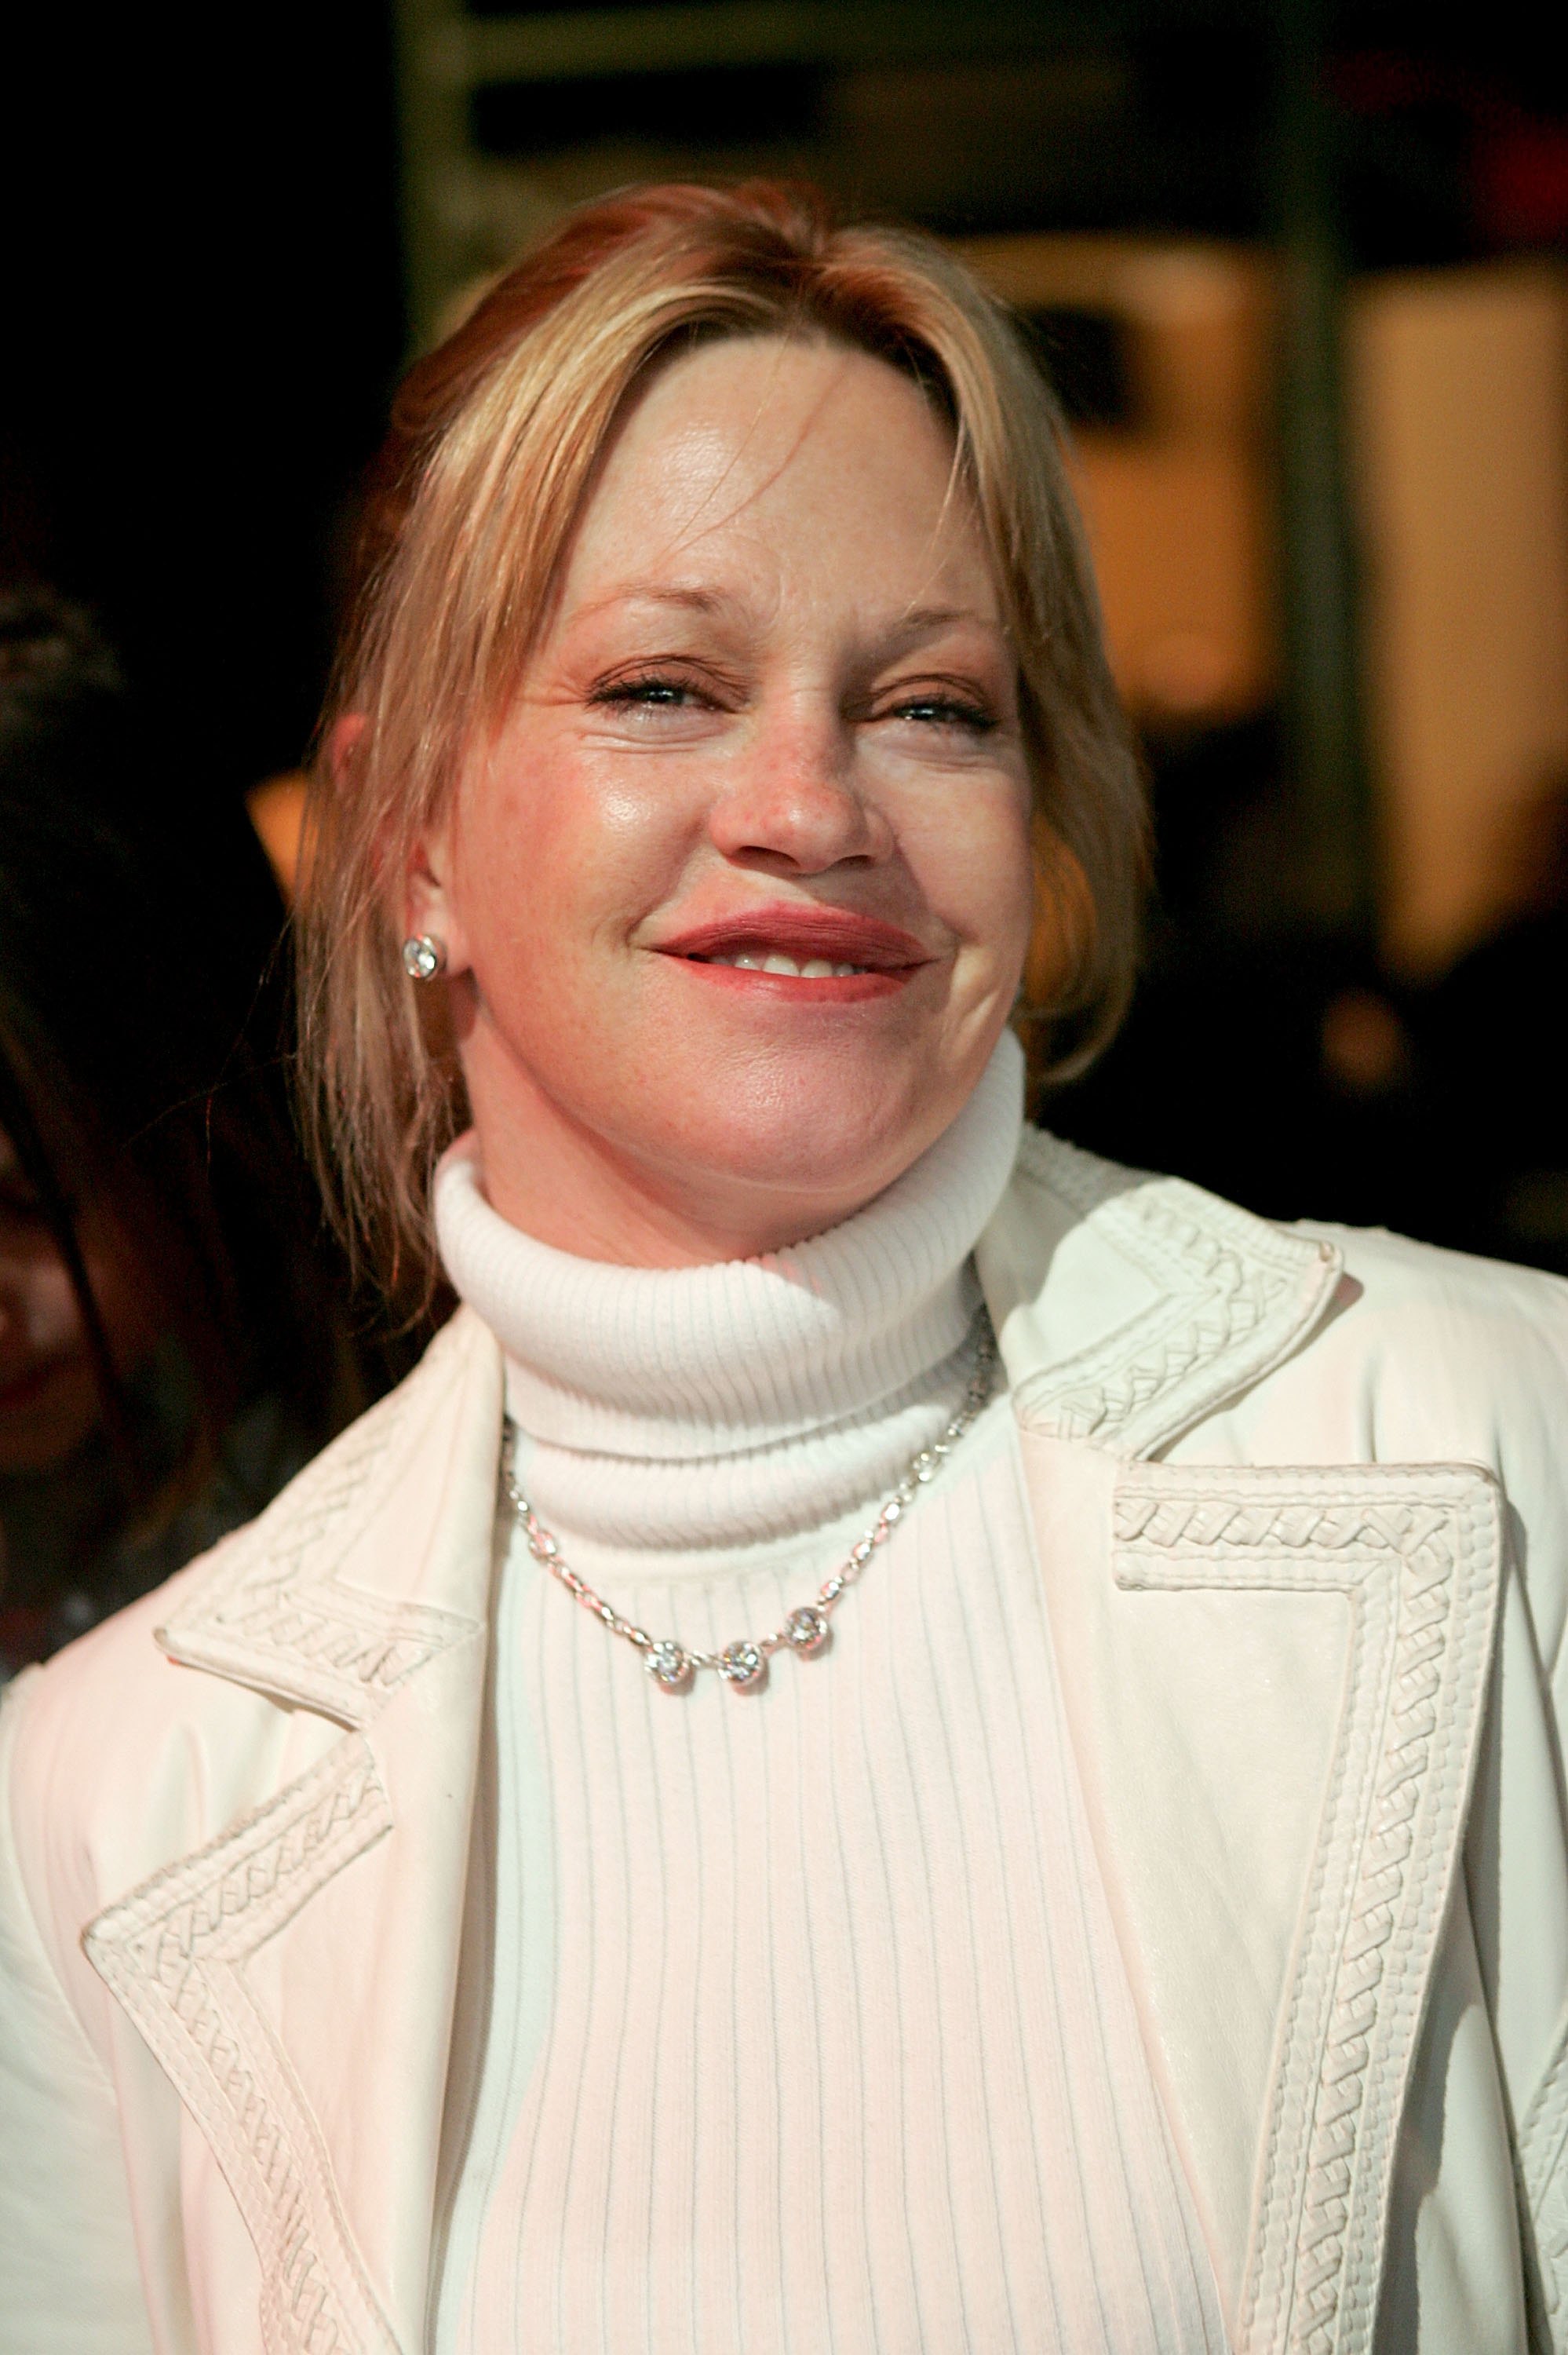 Melanie Griffith on April 4, 2006 in New York City | Source: Getty Images